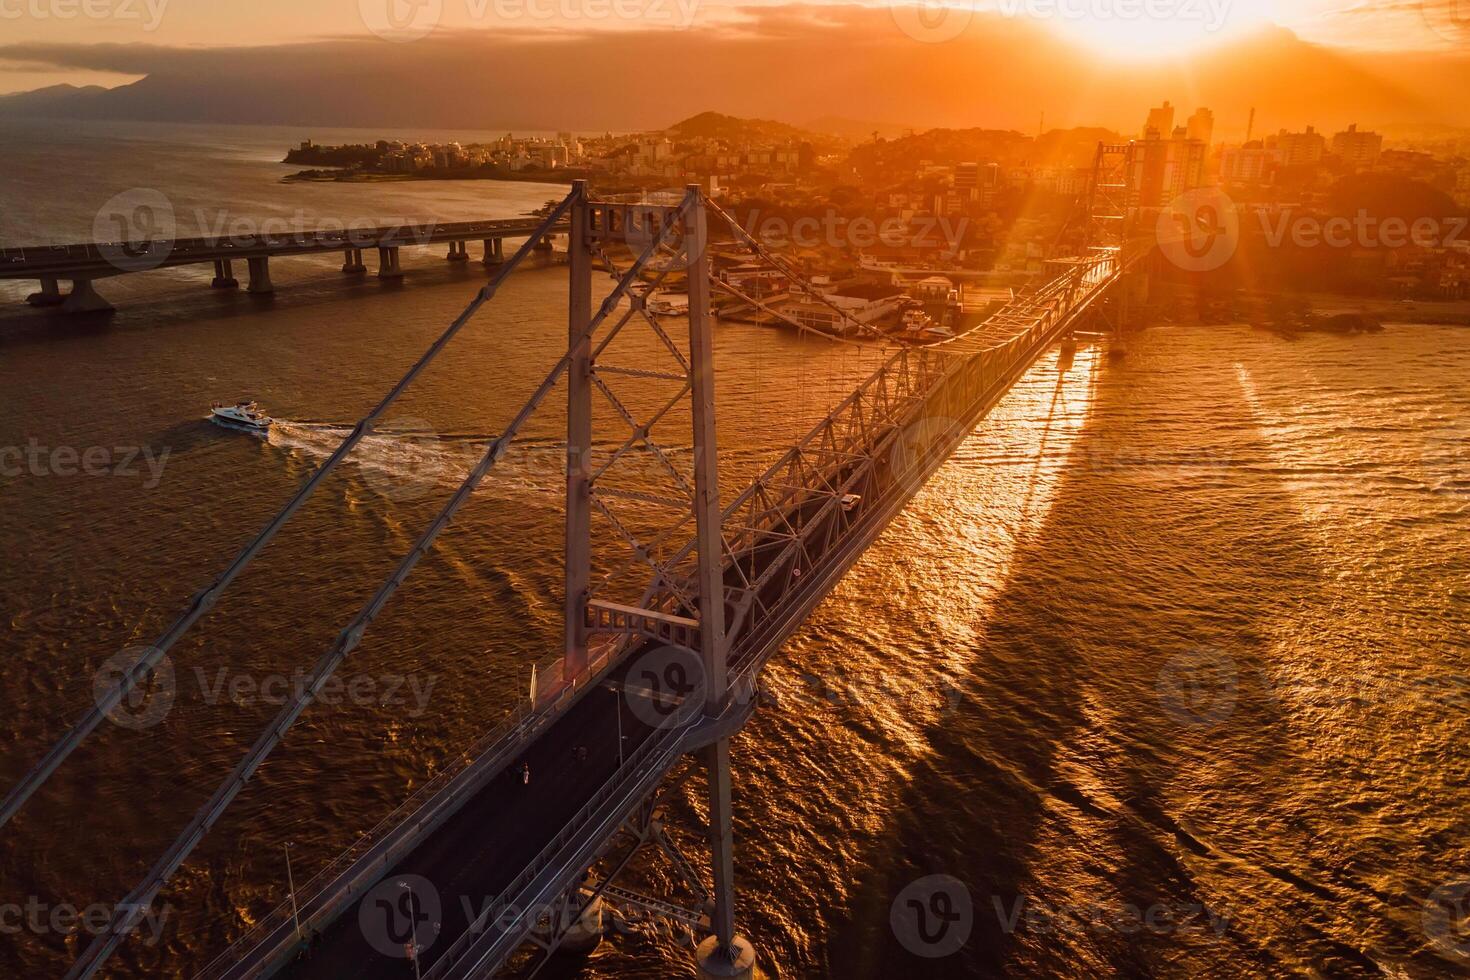 Cable bridge with sunset in Florianopolis, Brazil. Aerial view photo